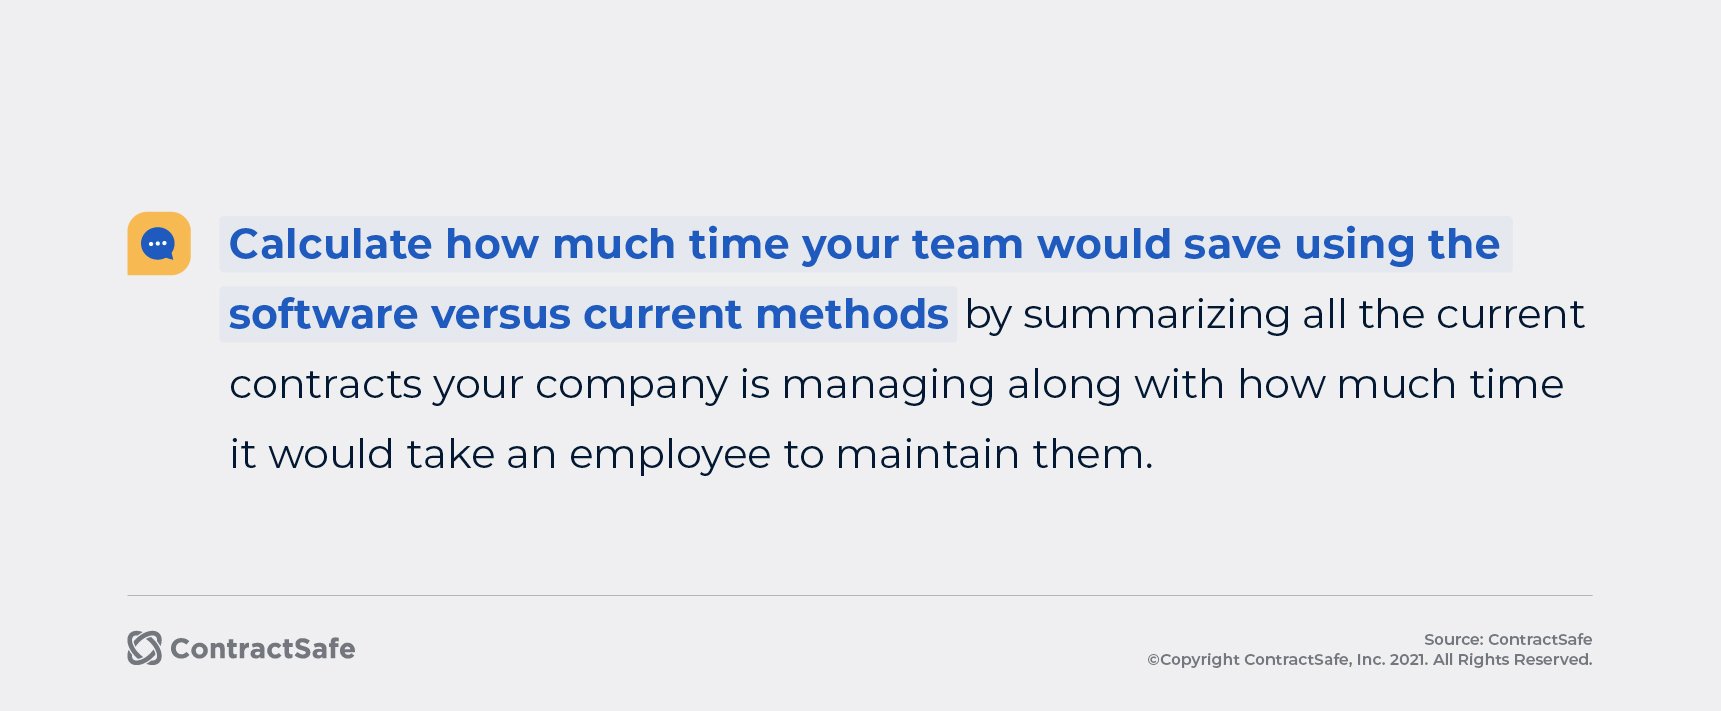 Calculate how much time your team would save using the software versus current methods by summarizing all the current contracts your company is managing along with how much time it would take an employee to maintain them. 